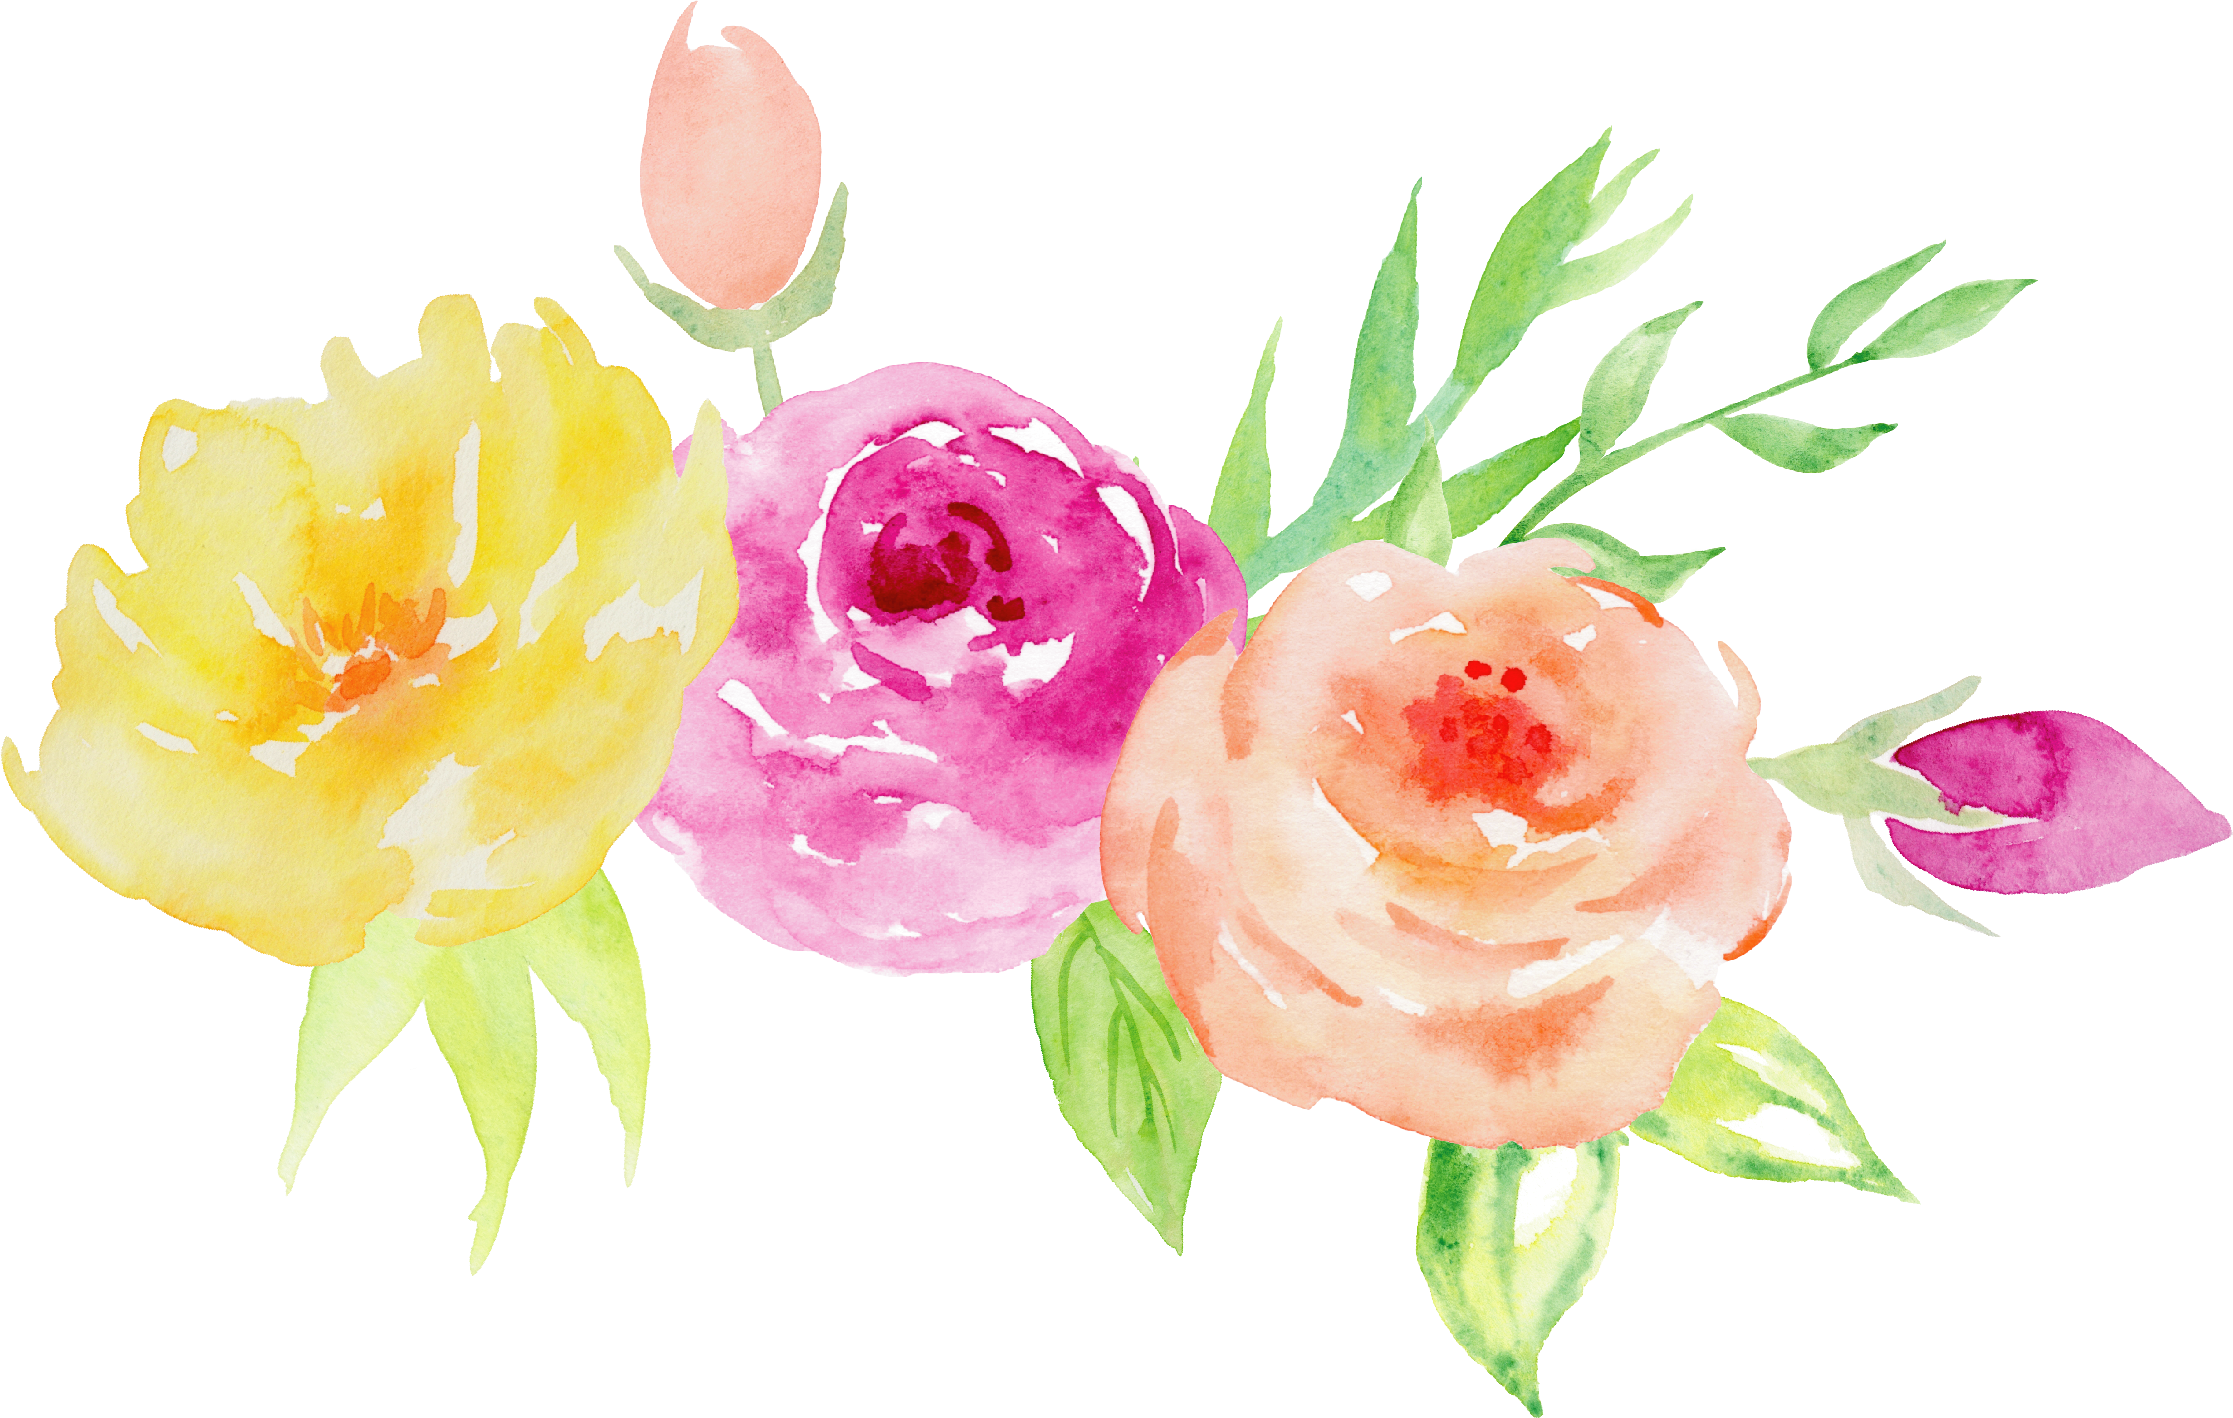 Garden Roses Watercolor Painting Floral Design Flower - 真夏 の 花束 イラスト 無料 (2233x1418)